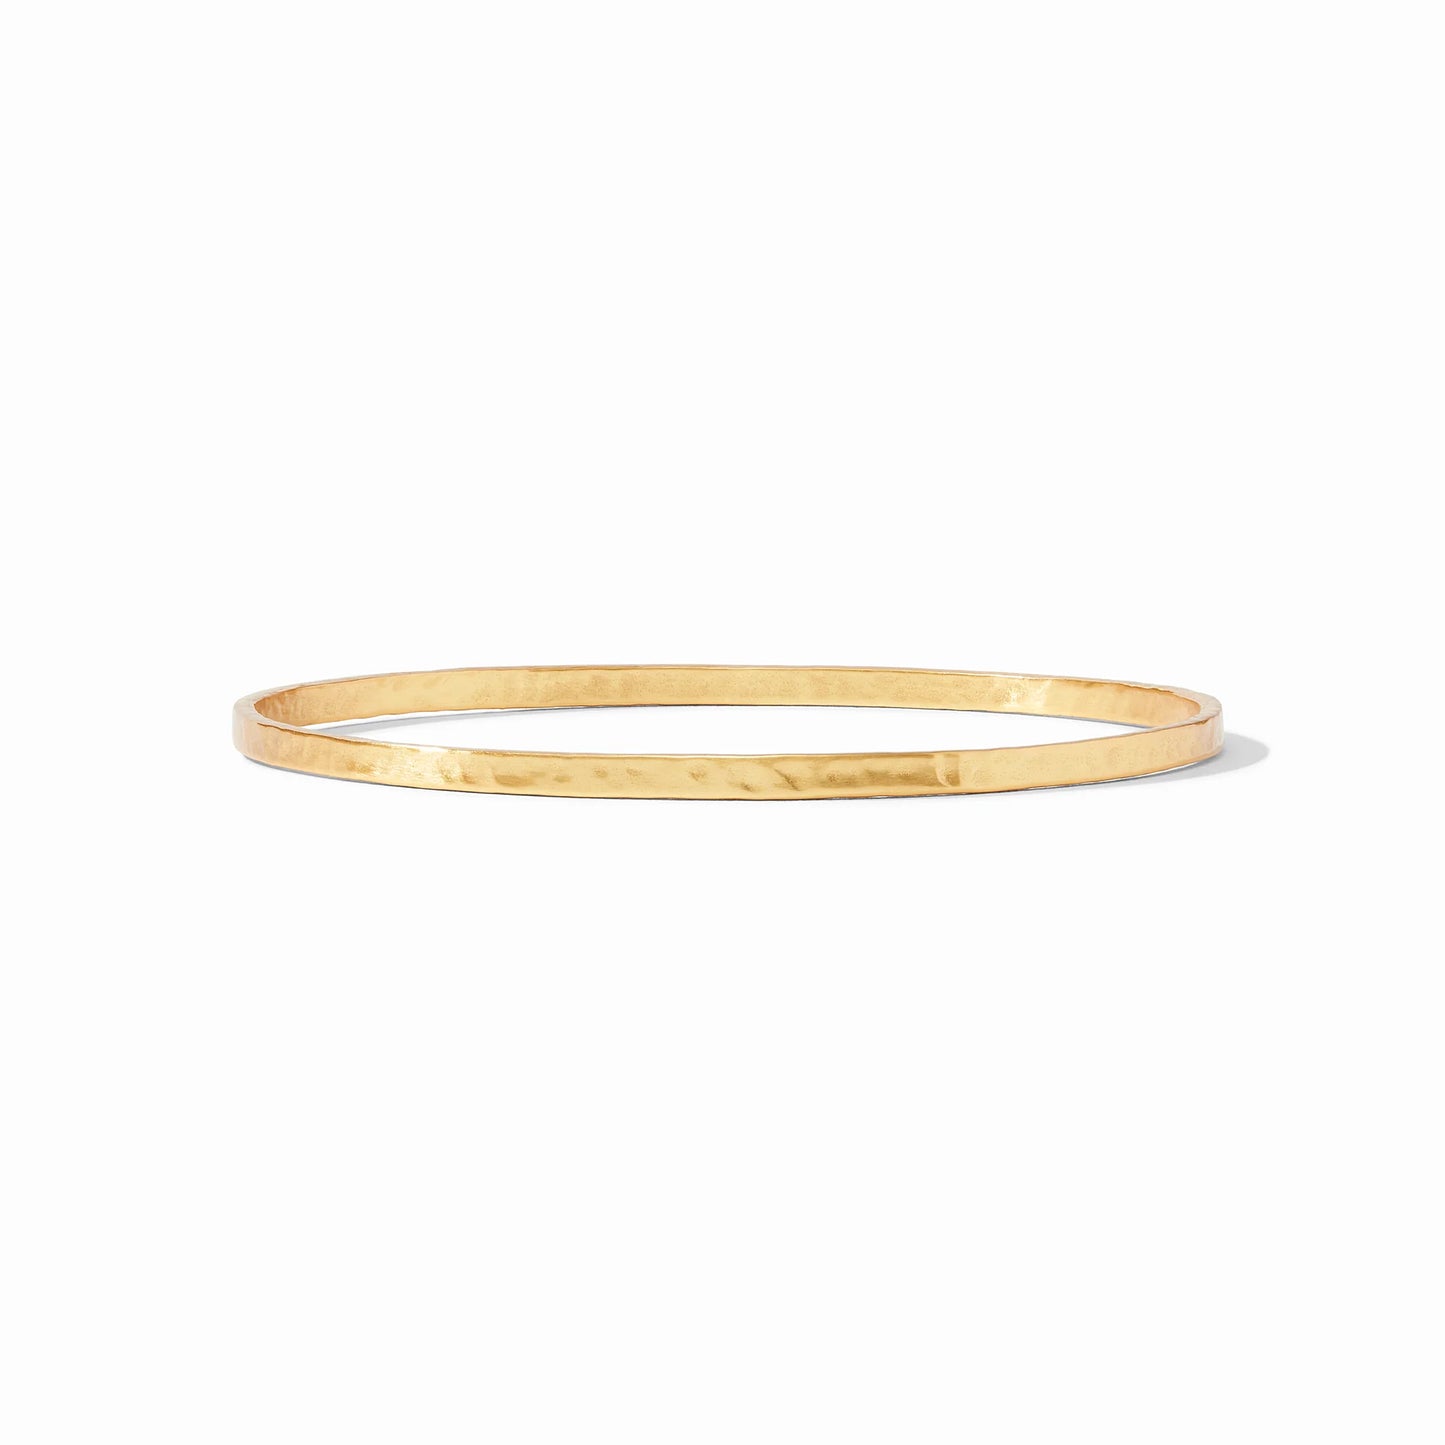 Julie Vos Crescent Bangle-Not in Shopify - CJC-Julie Vos-The Village Shoppe, Women’s Fashion Boutique, Shop Online and In Store - Located in Muscle Shoals, AL.